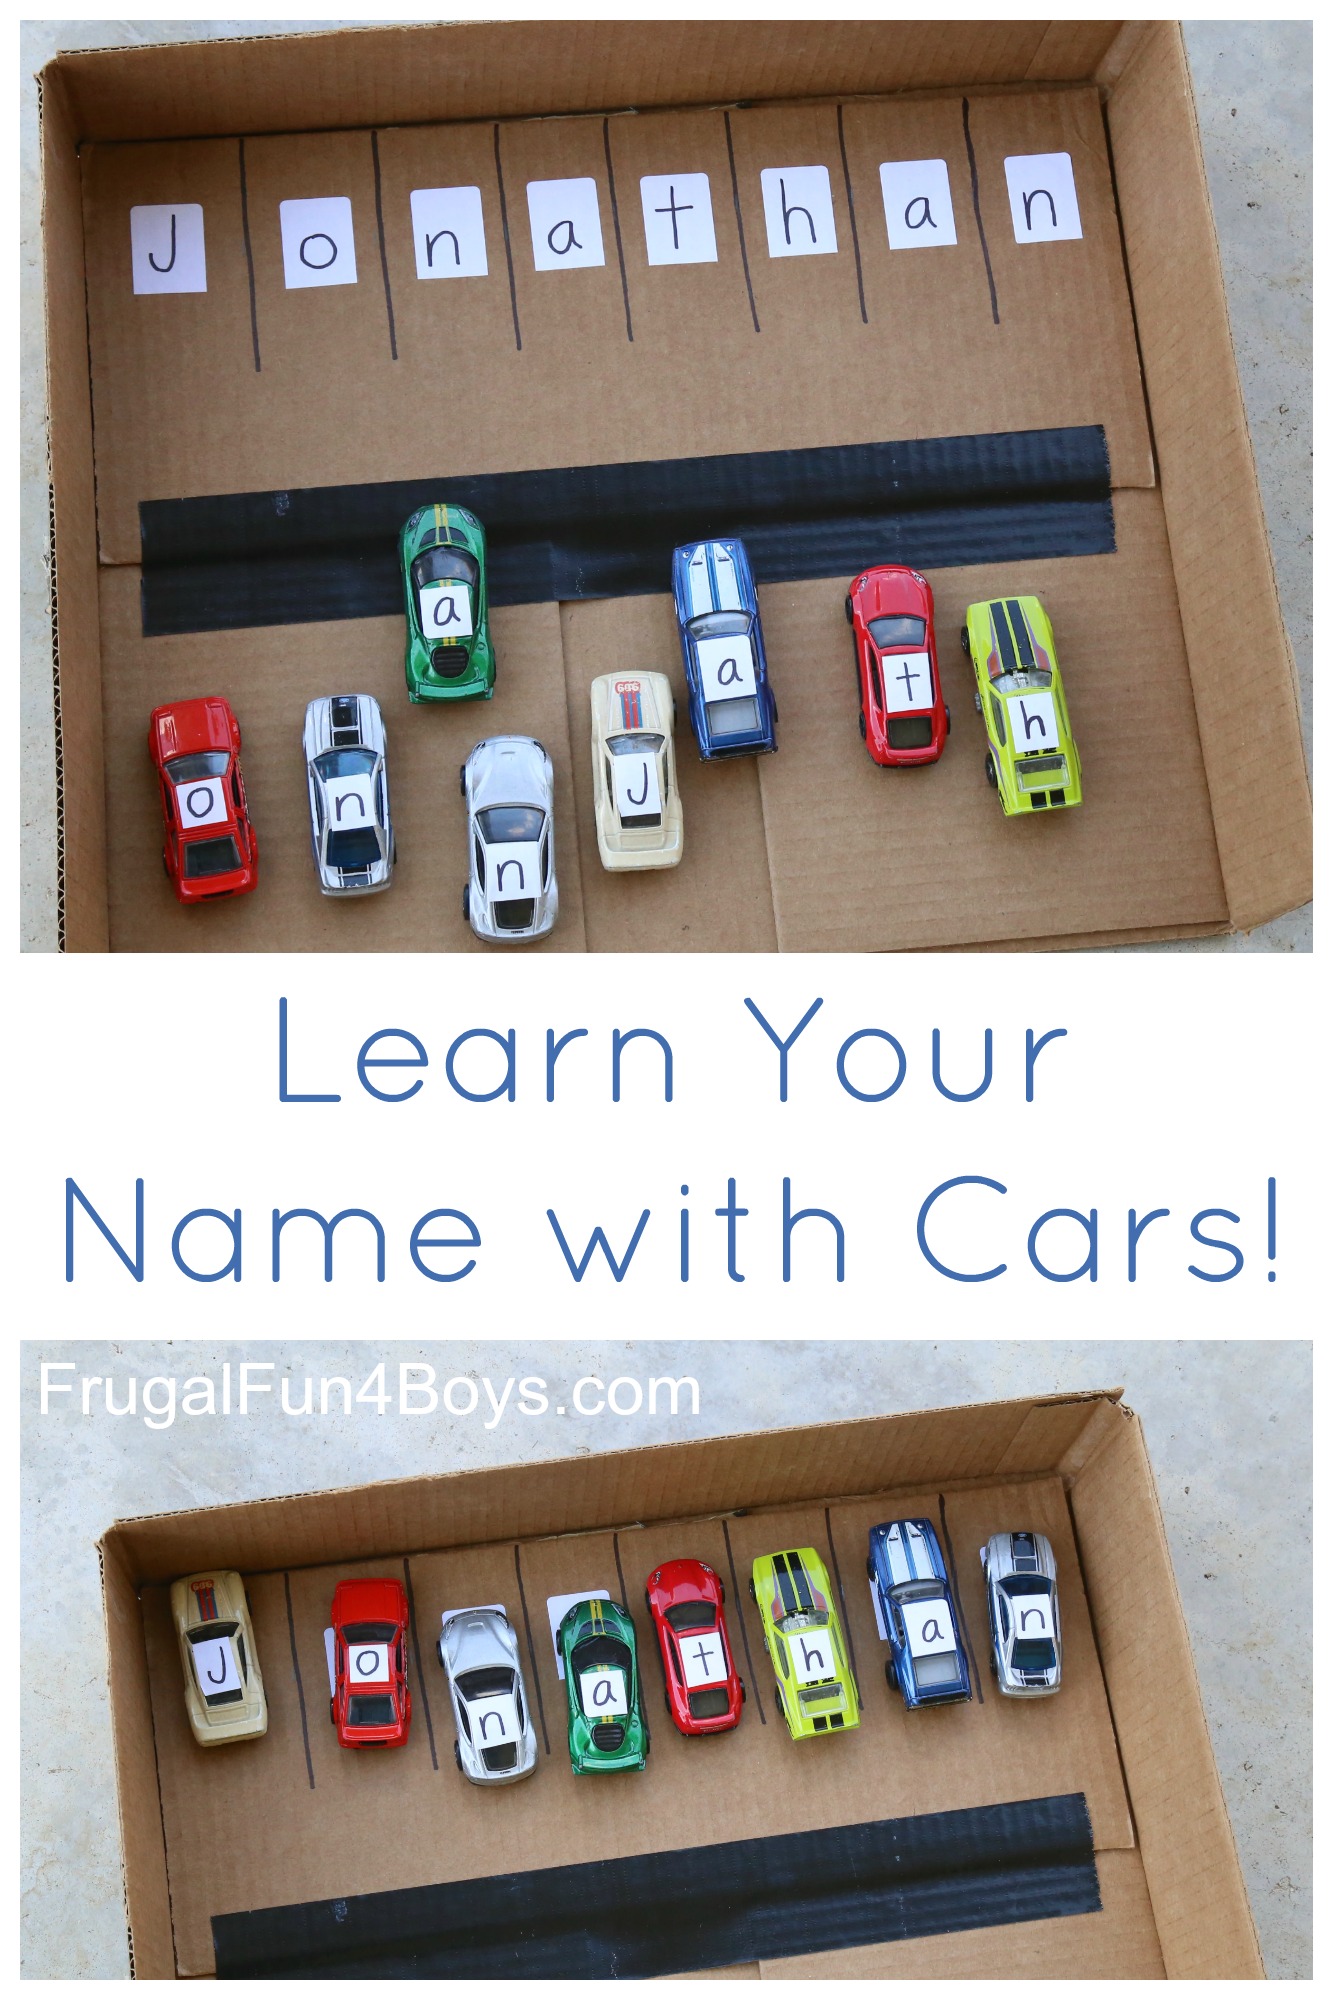 Learn Your Name with Cars!